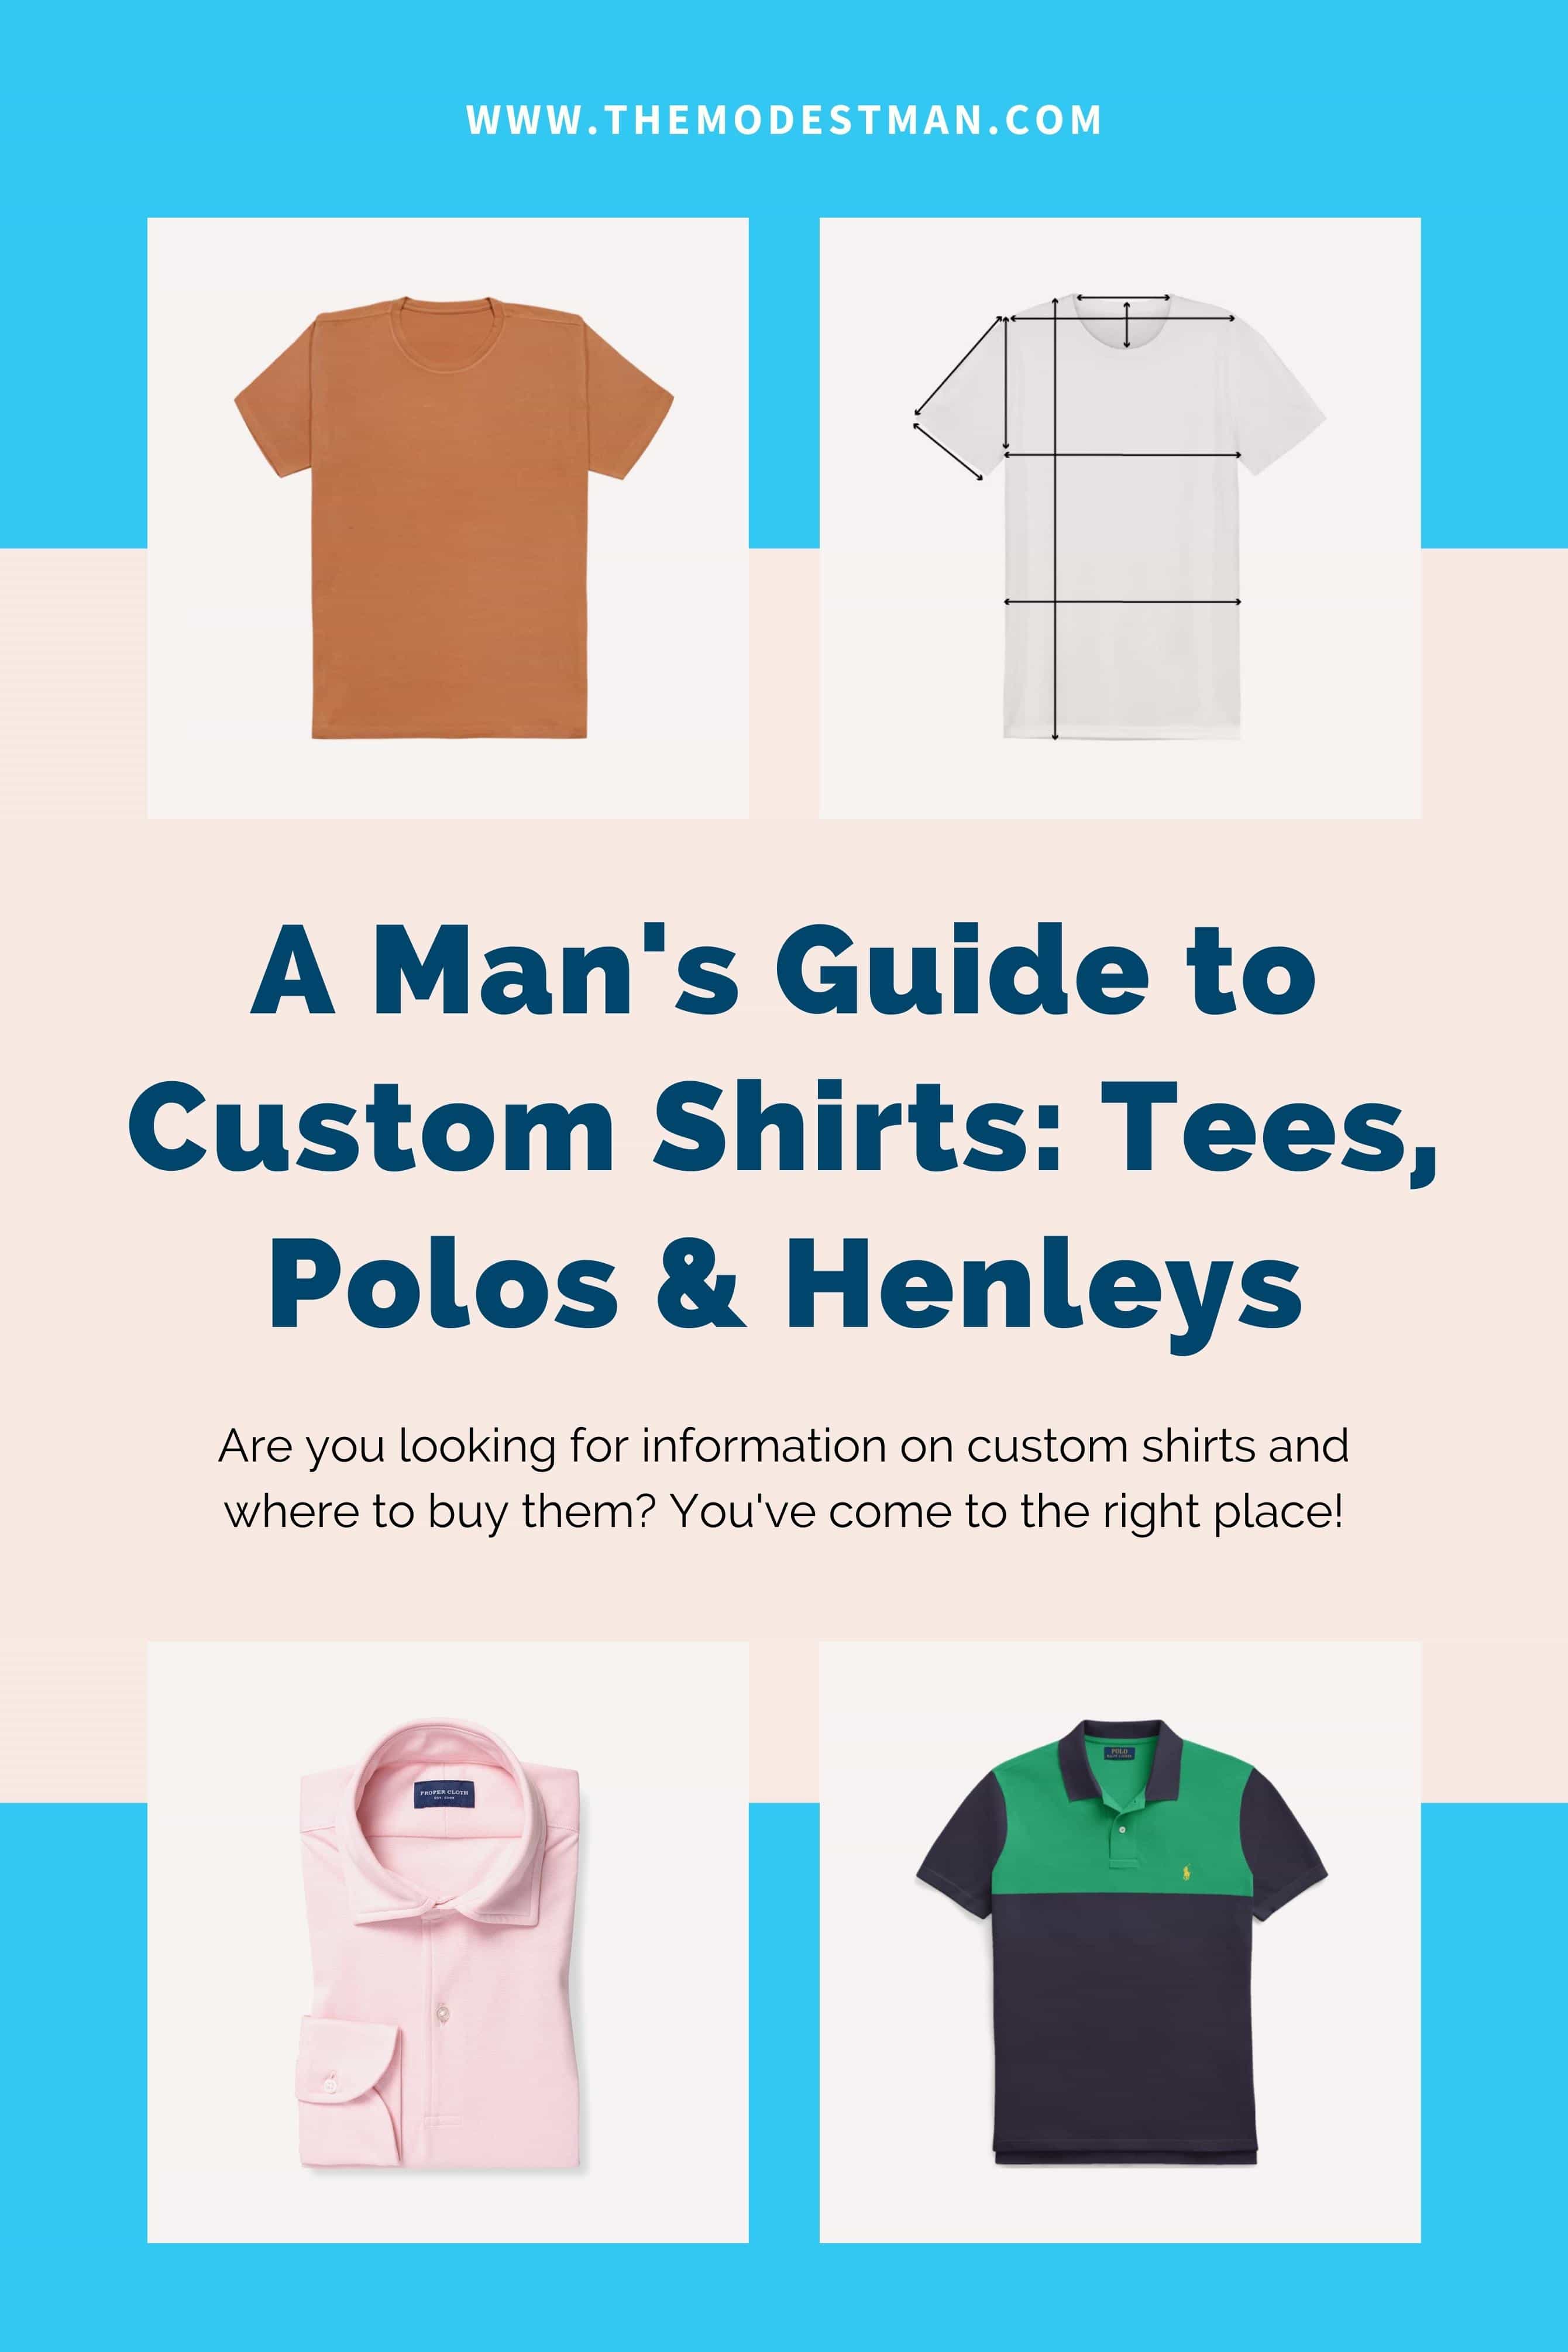 T-shirts and Polos - Men